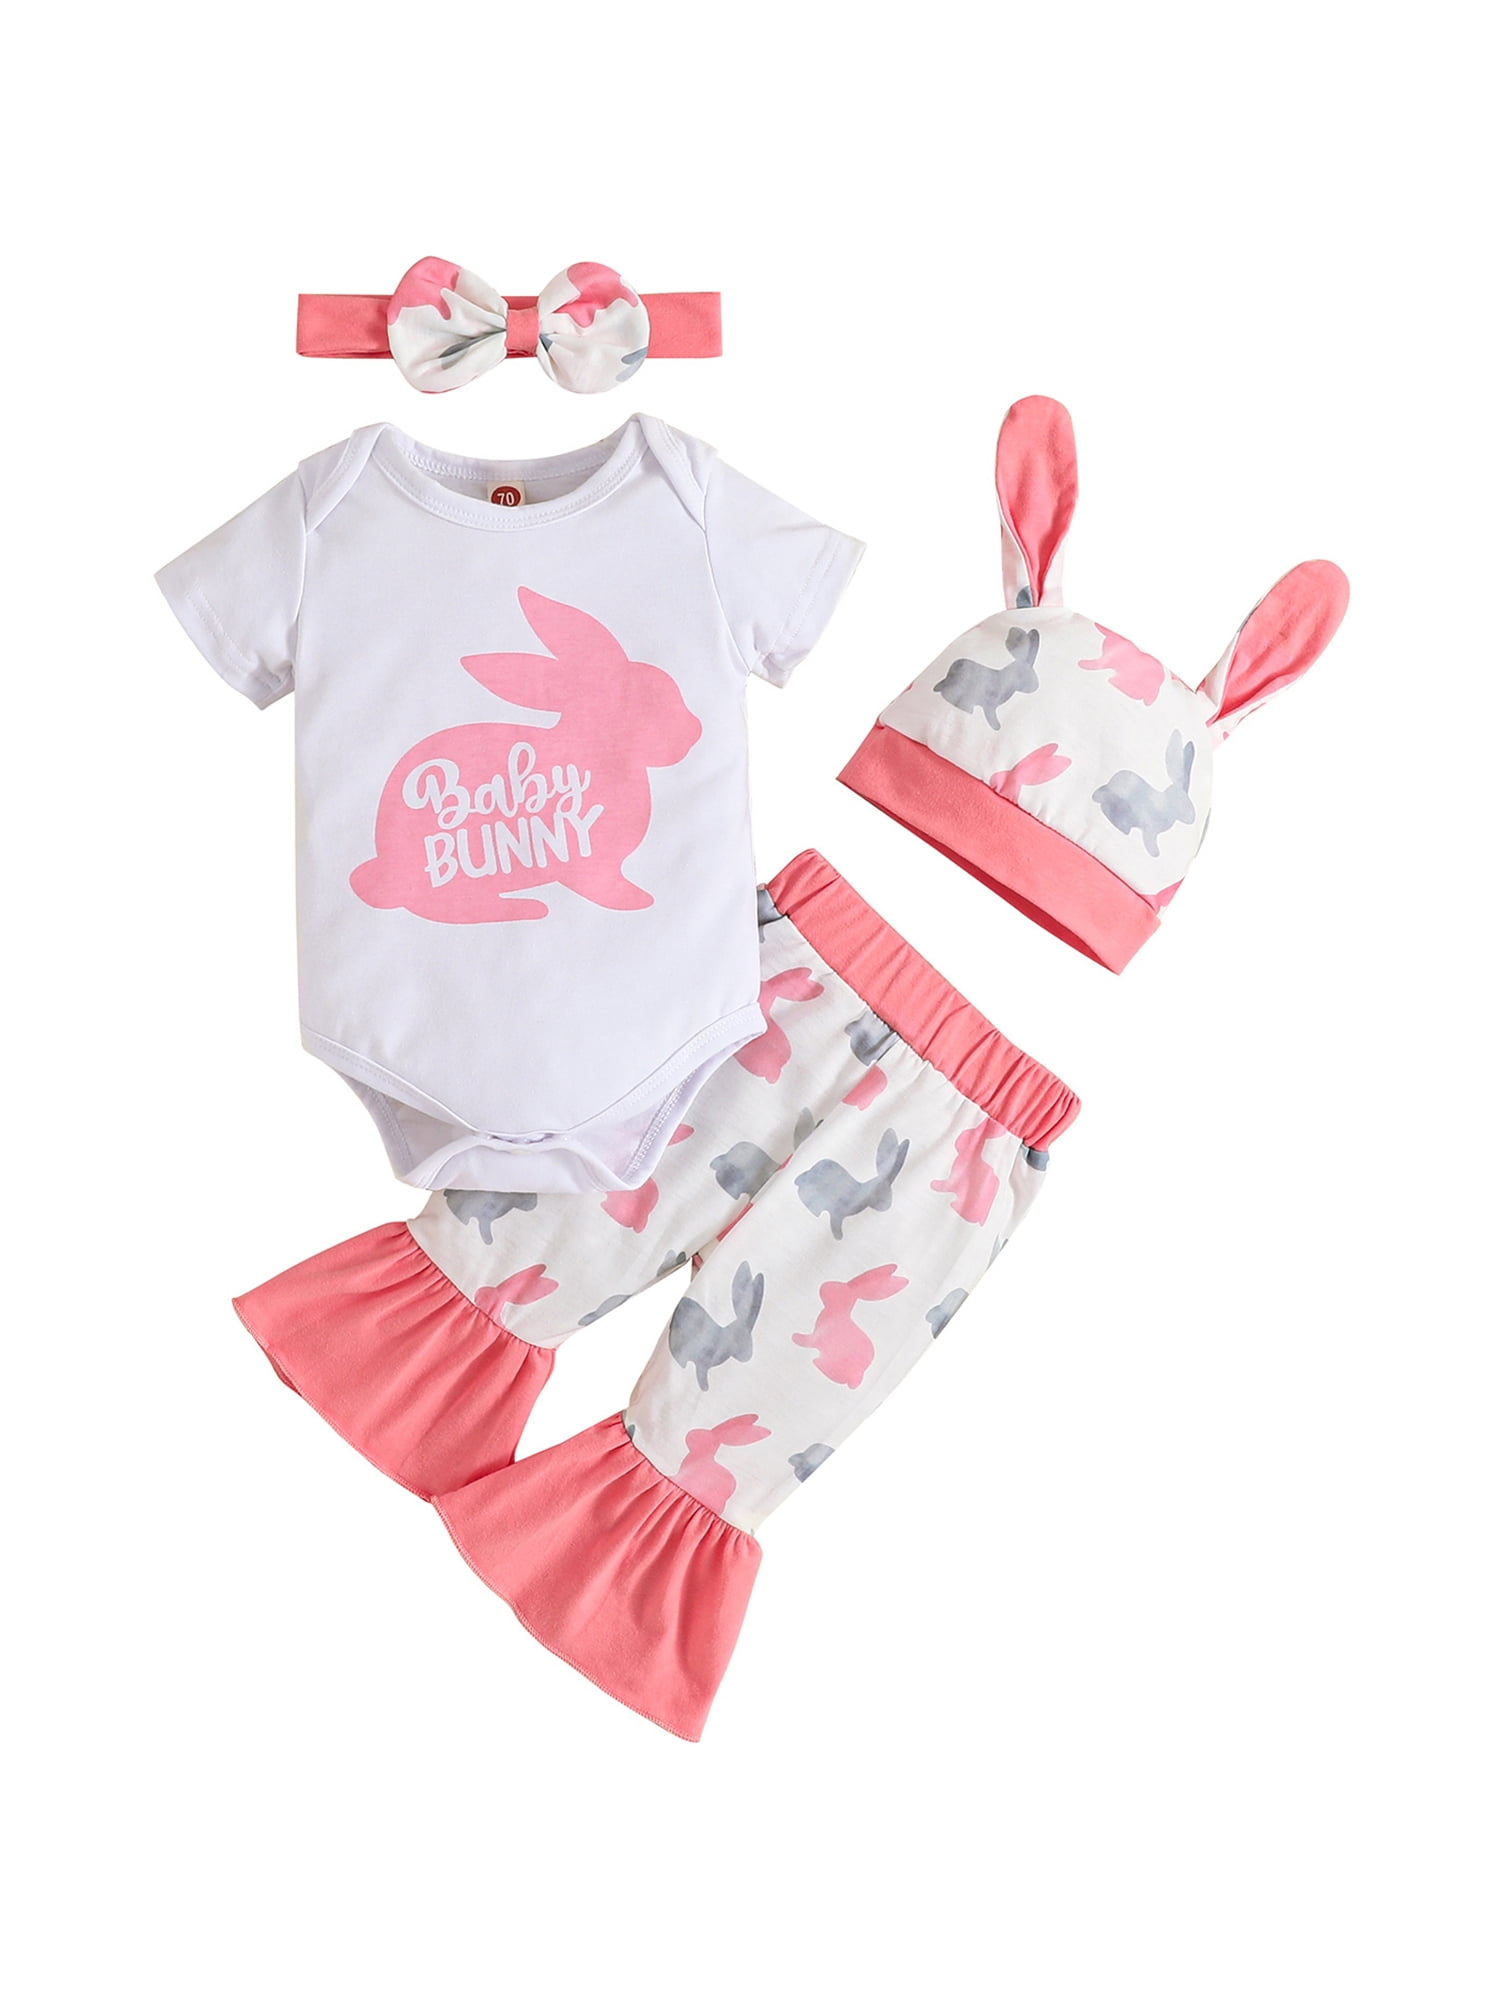 xkwyshop Infant Baby Girl My First Easter Outfits Short Sleeve Rabbit Print  Romper Tops Flared Pants Hat Headband Set 0-3 Months